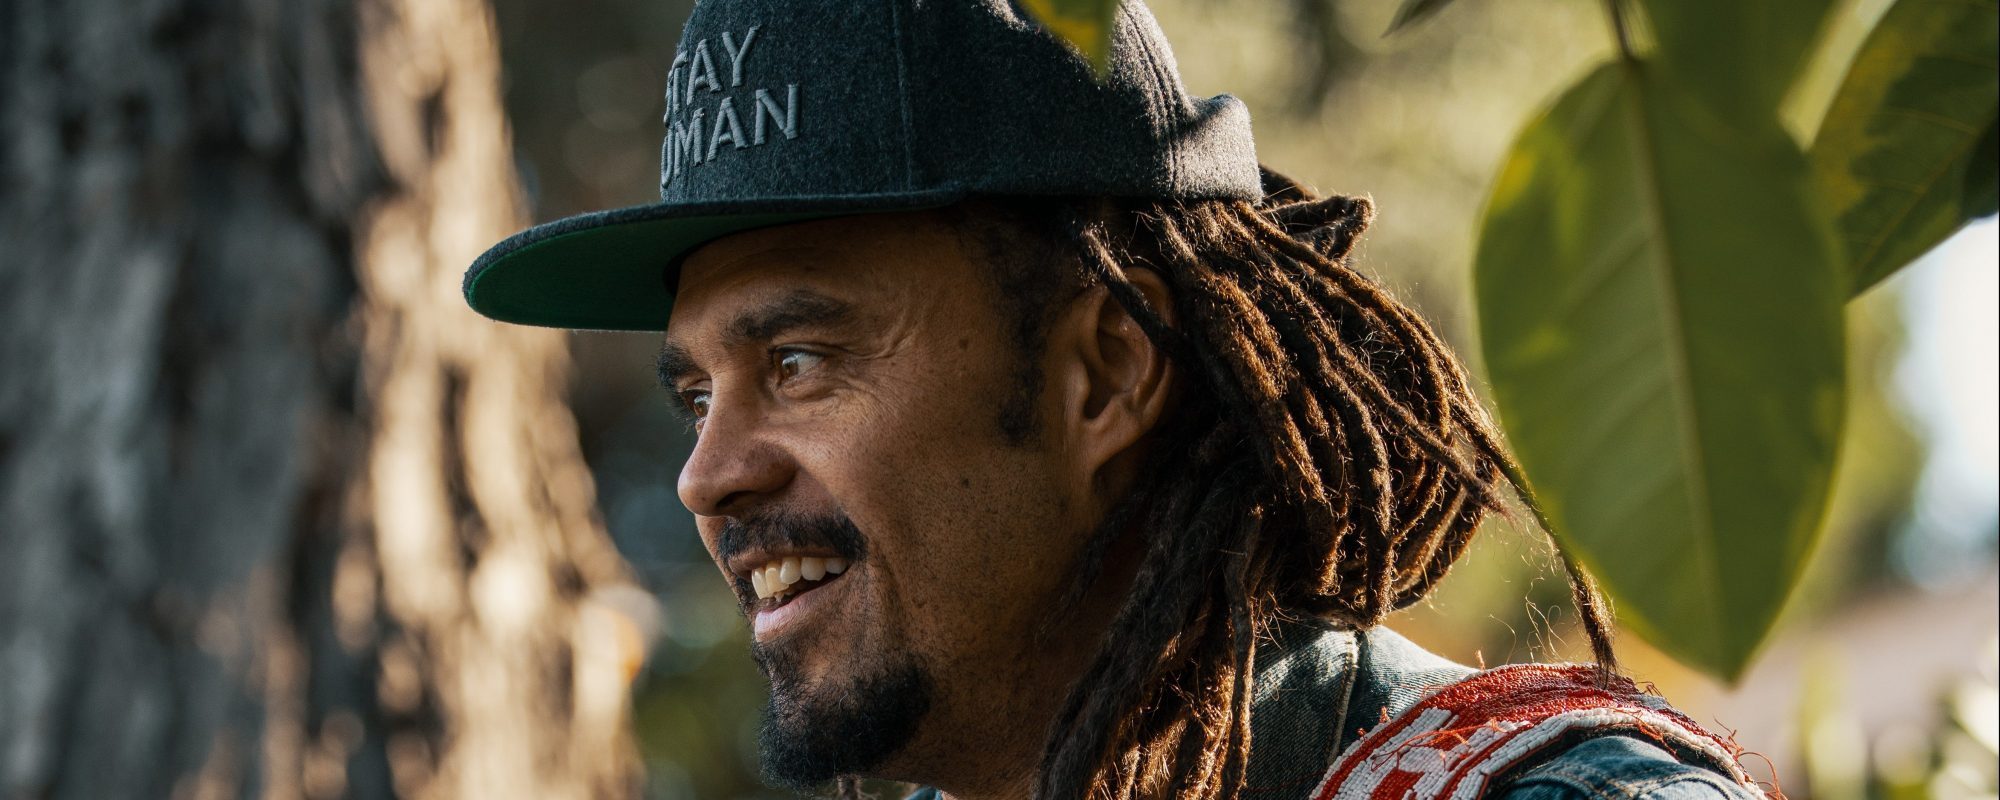 Combating Gun Violence And Planting The Seeds Of Love: Michael Franti On His New Single And The Power Of Music